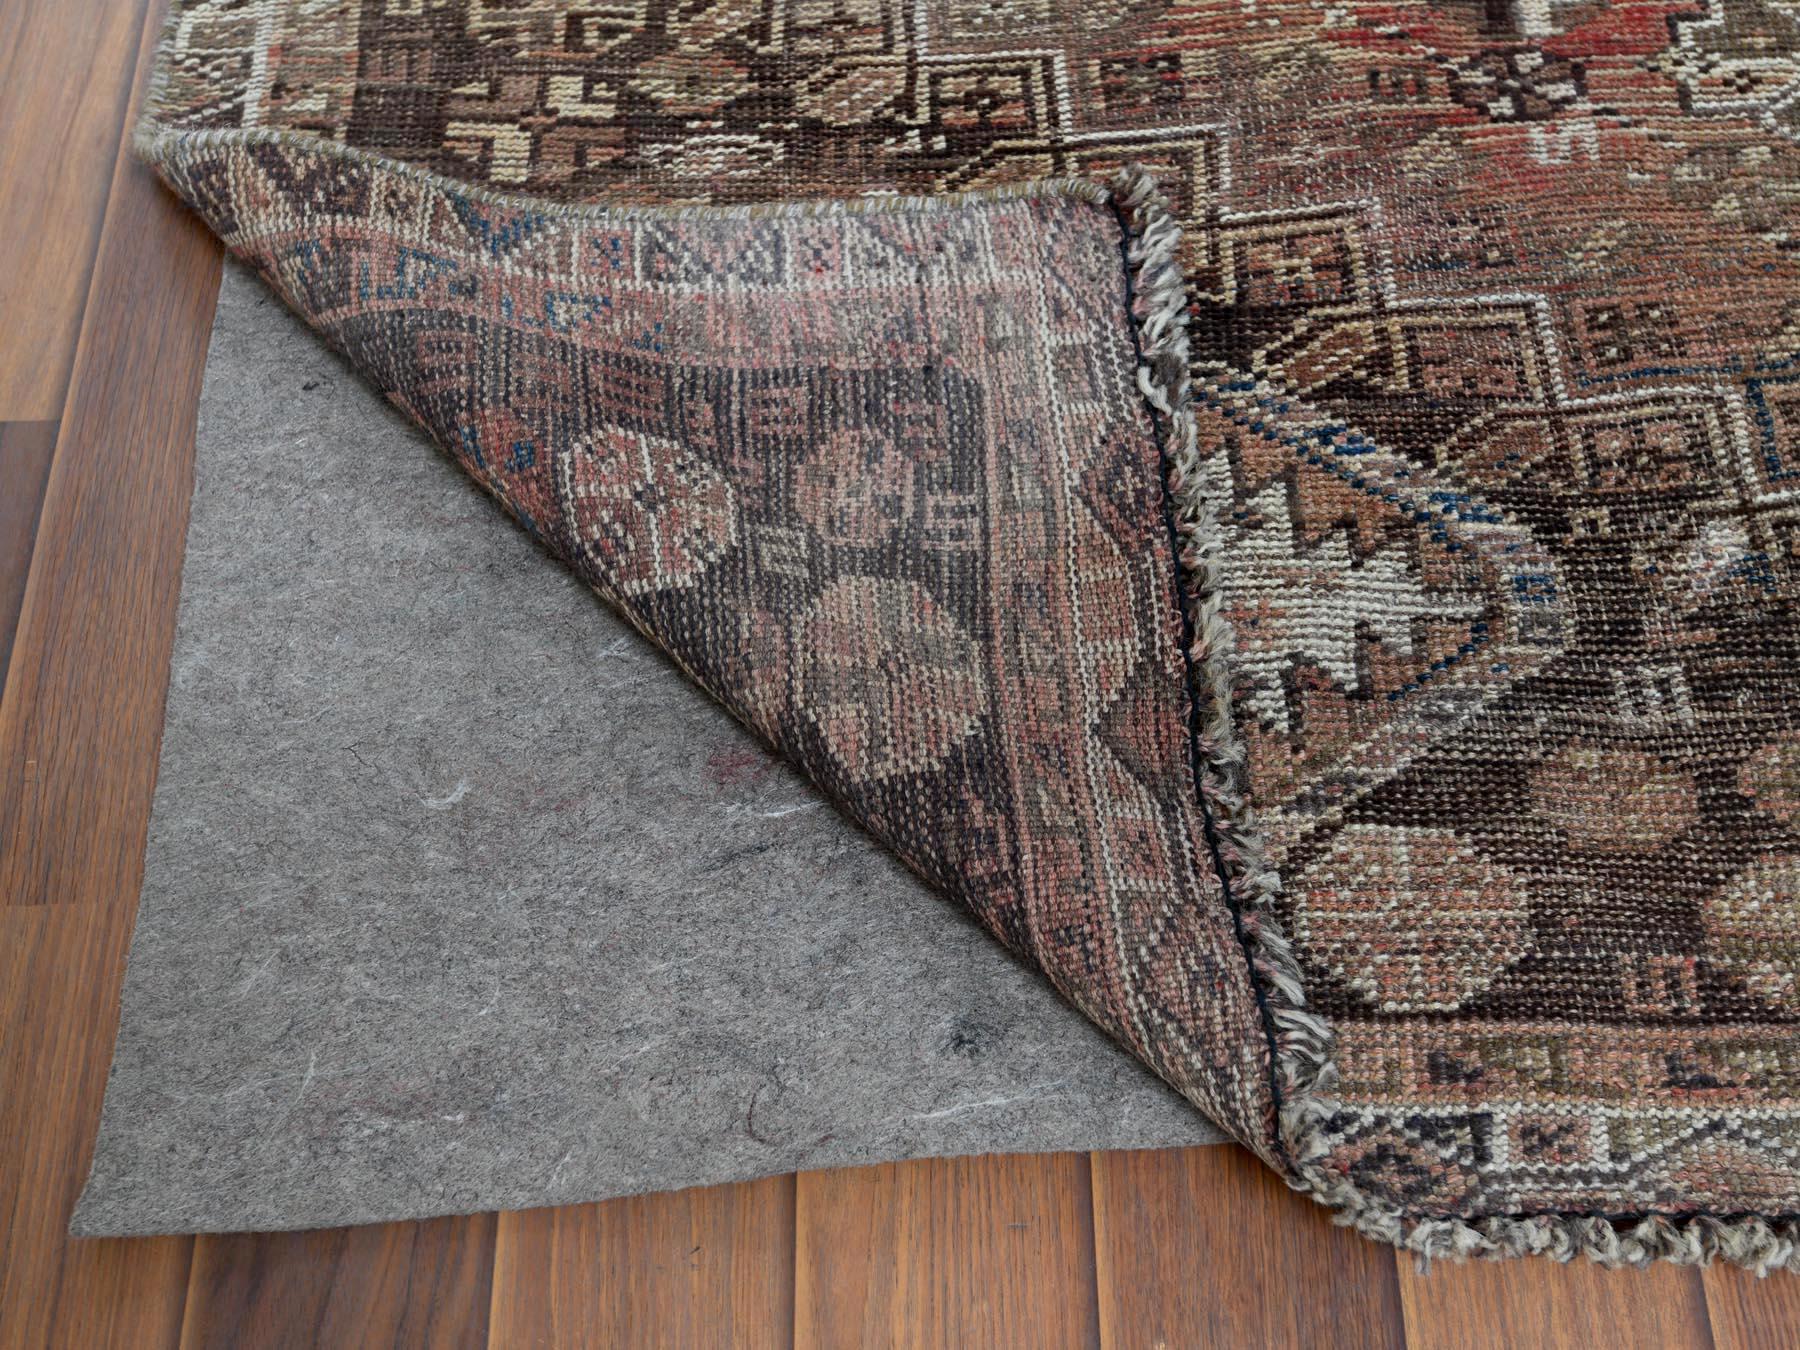 Medieval Tan Color Persian Shiraz with Double Medallion Worn Down Hand Knotted Wool Rug For Sale